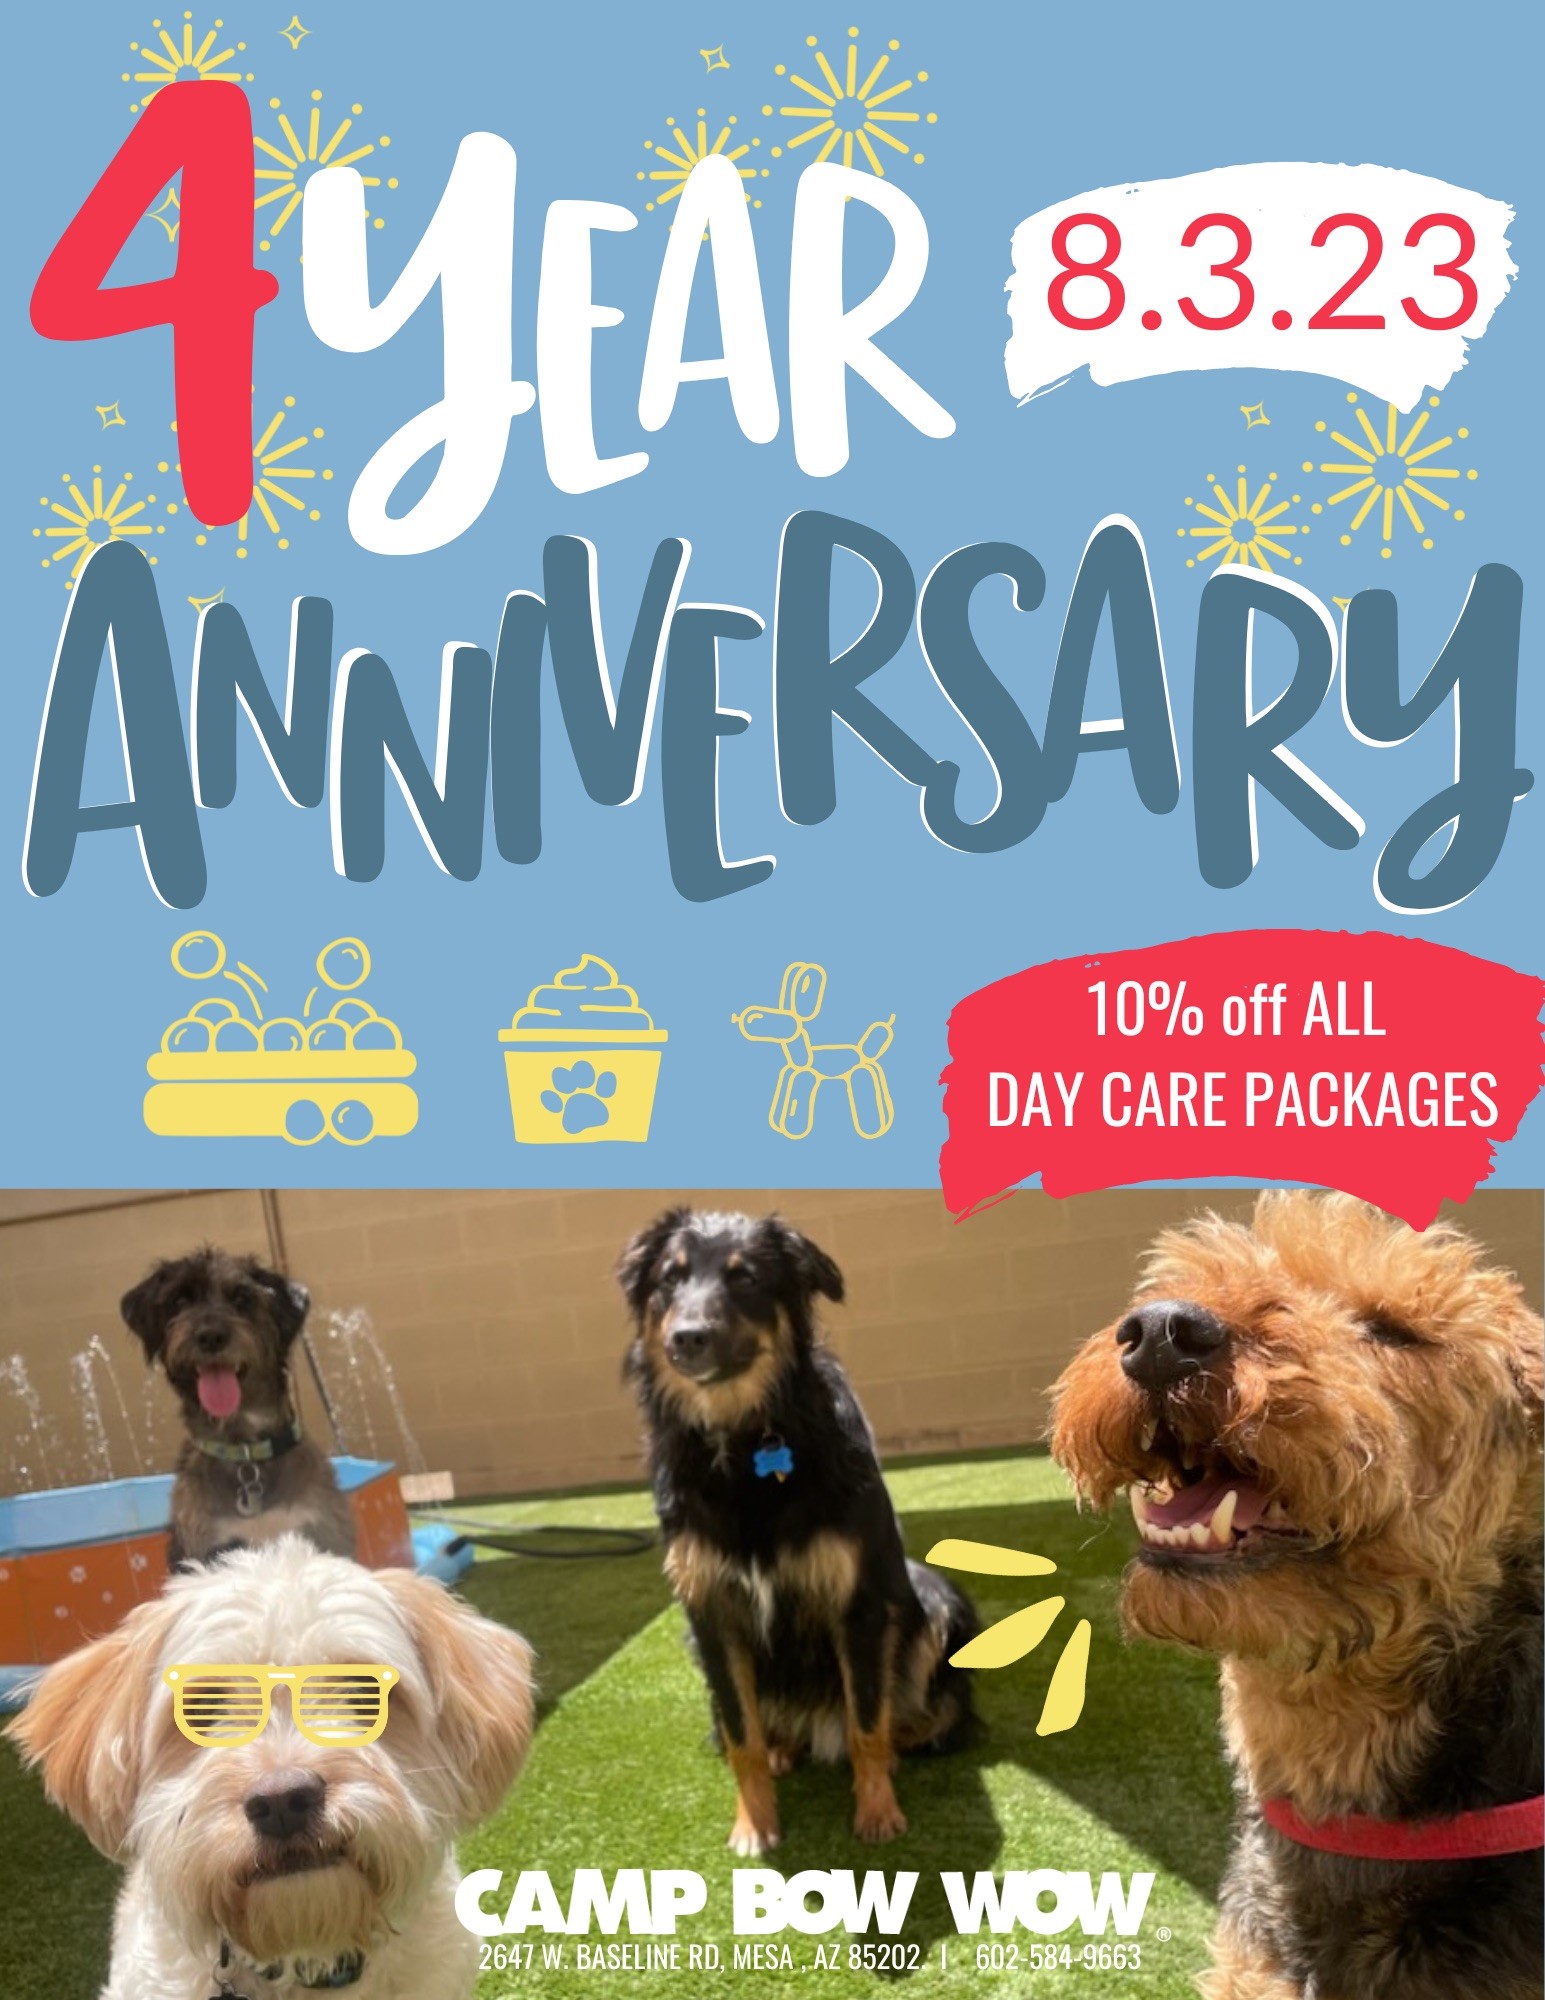 4 Year Anniversary: 10% off all day care packages